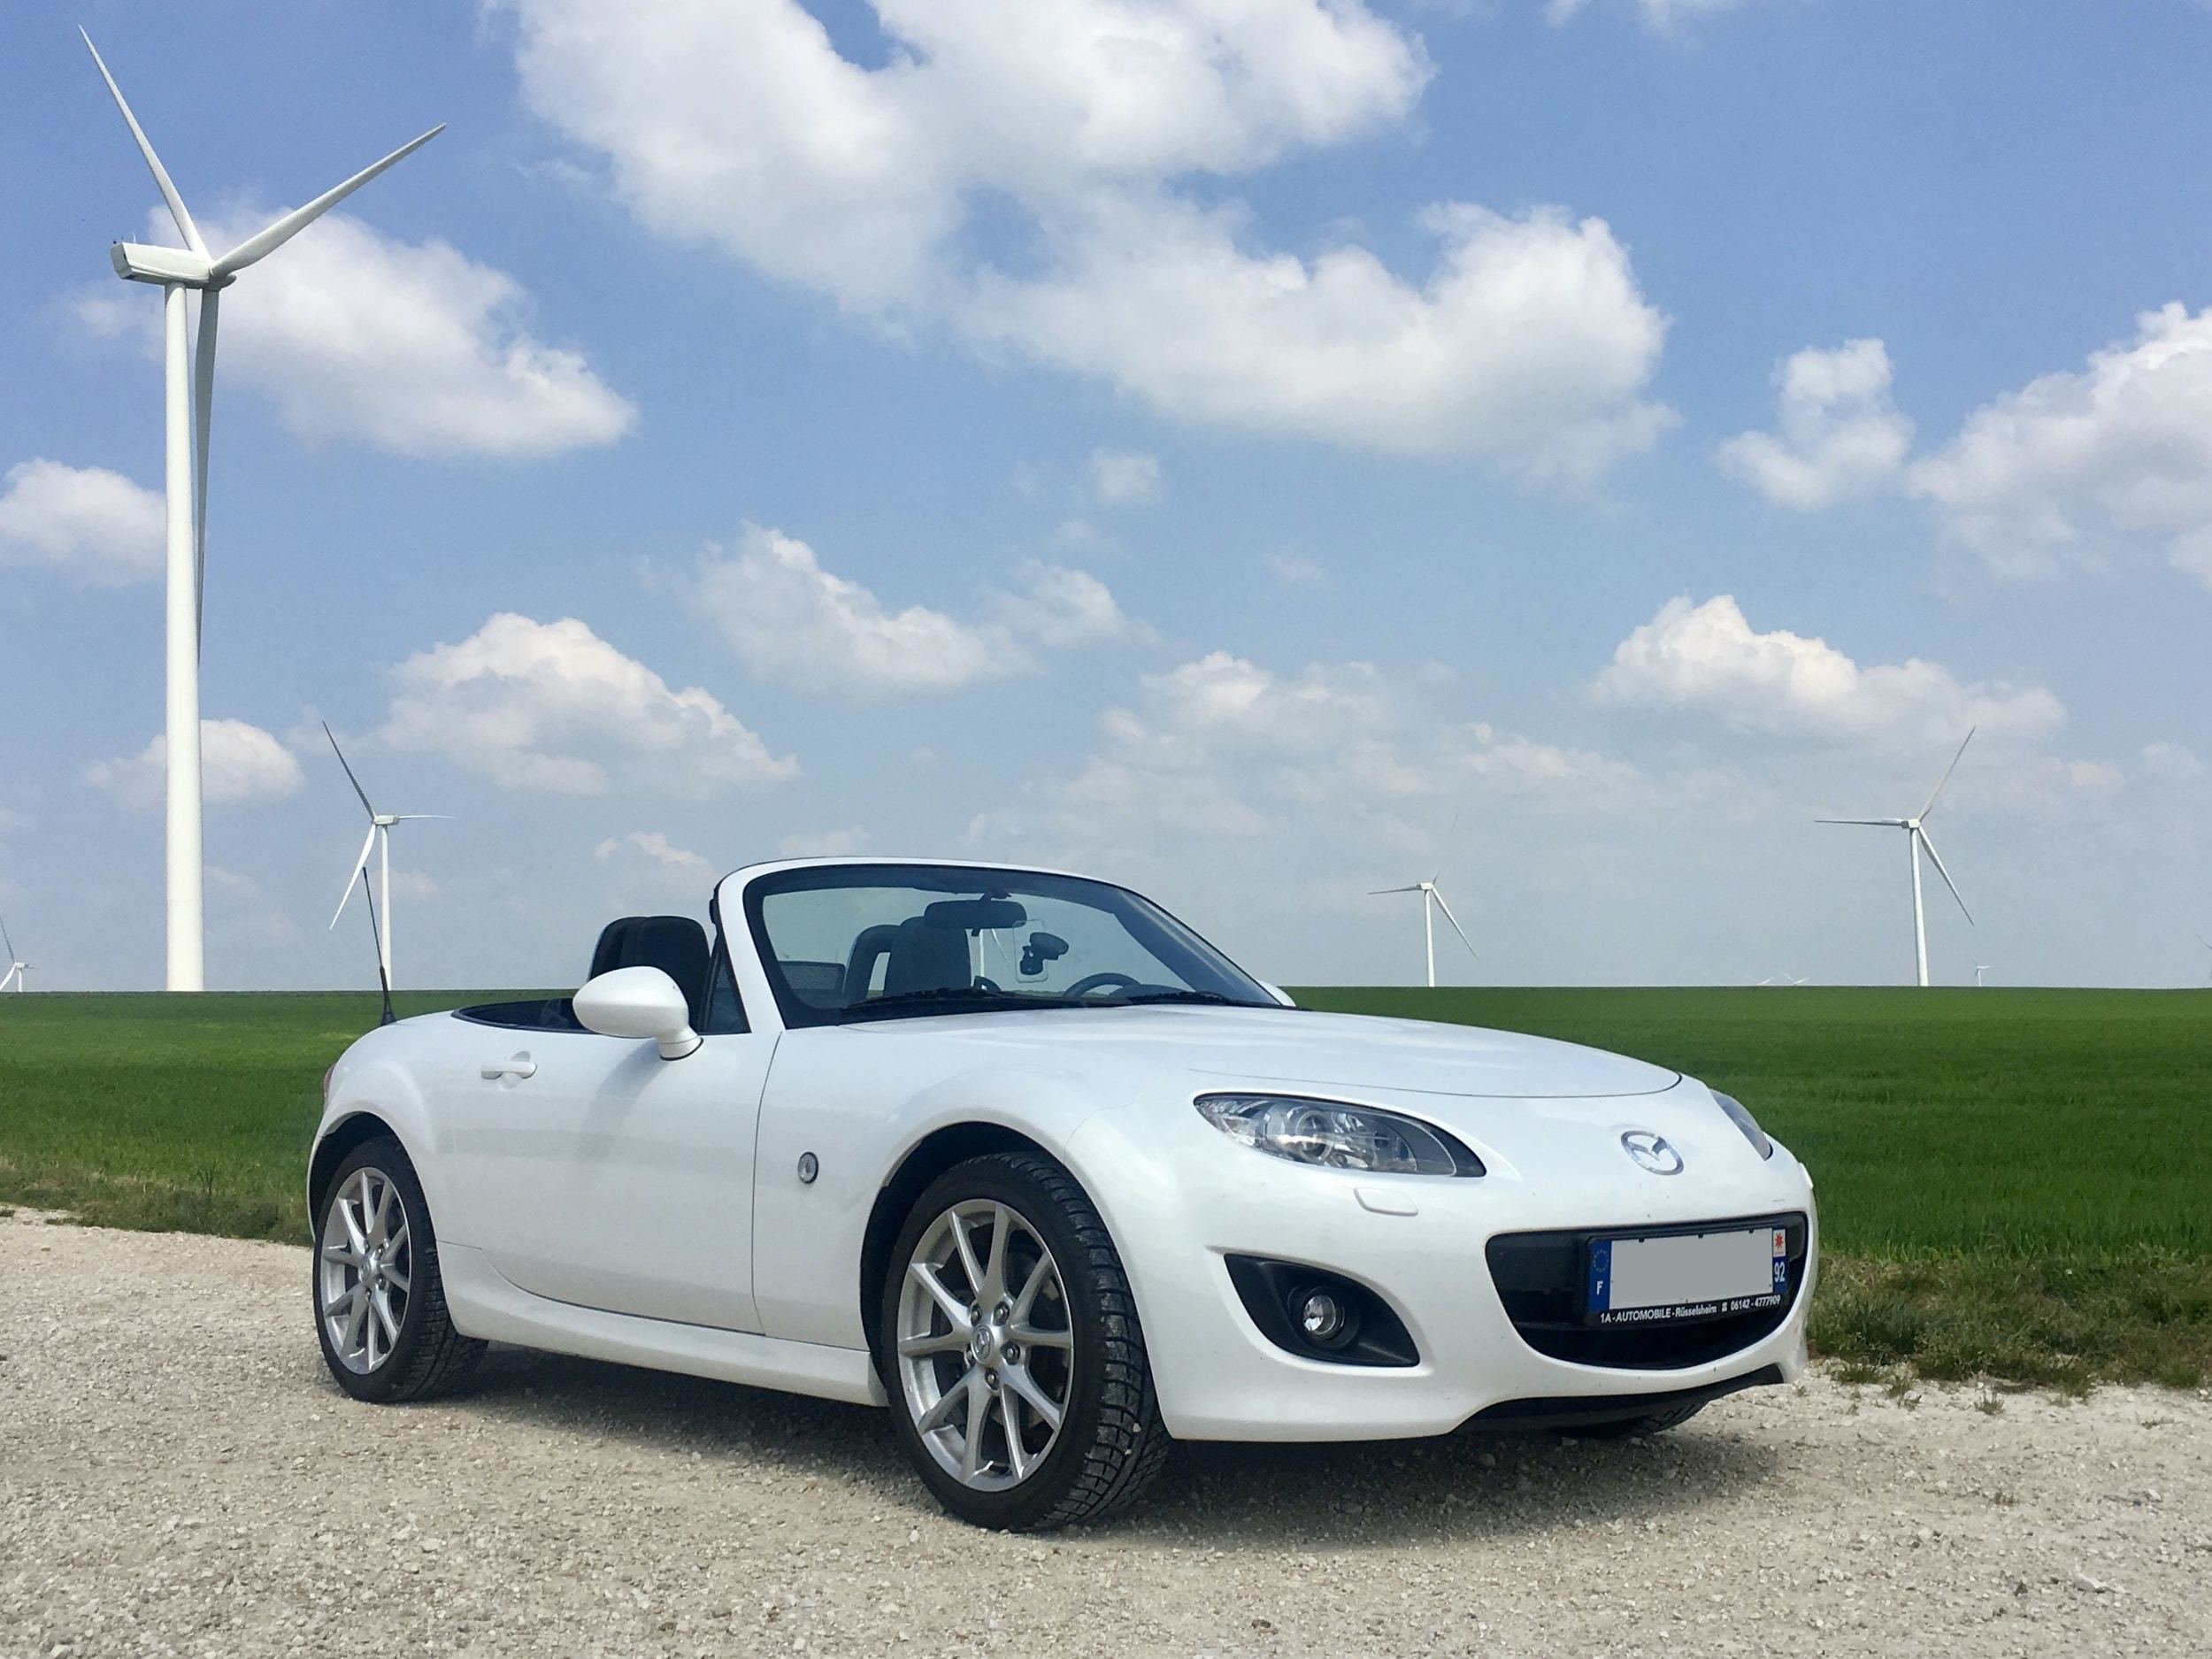 Mazda MX-5 launched in 1989.